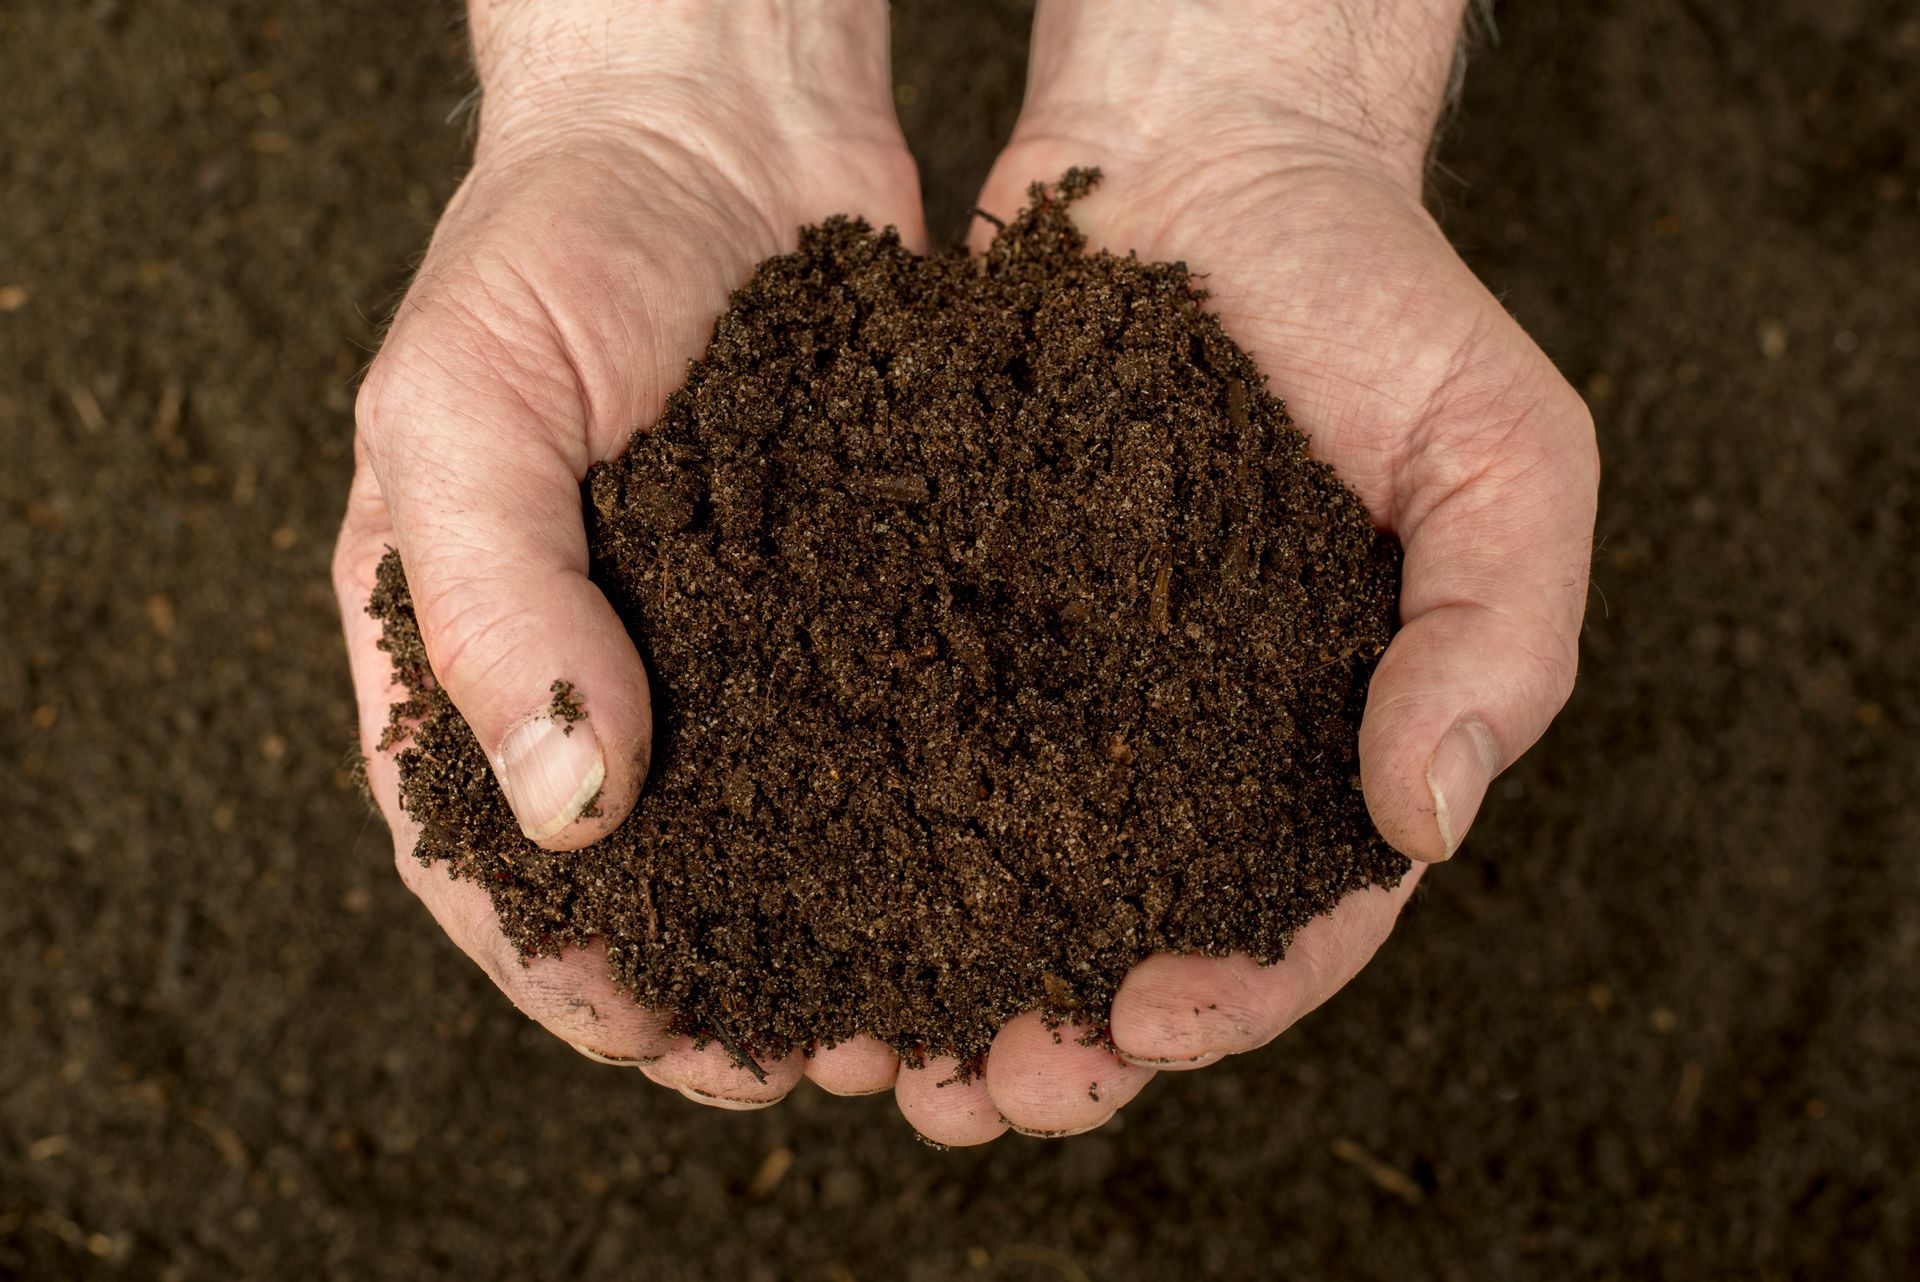 A person is holding a pile of dirt in their hands